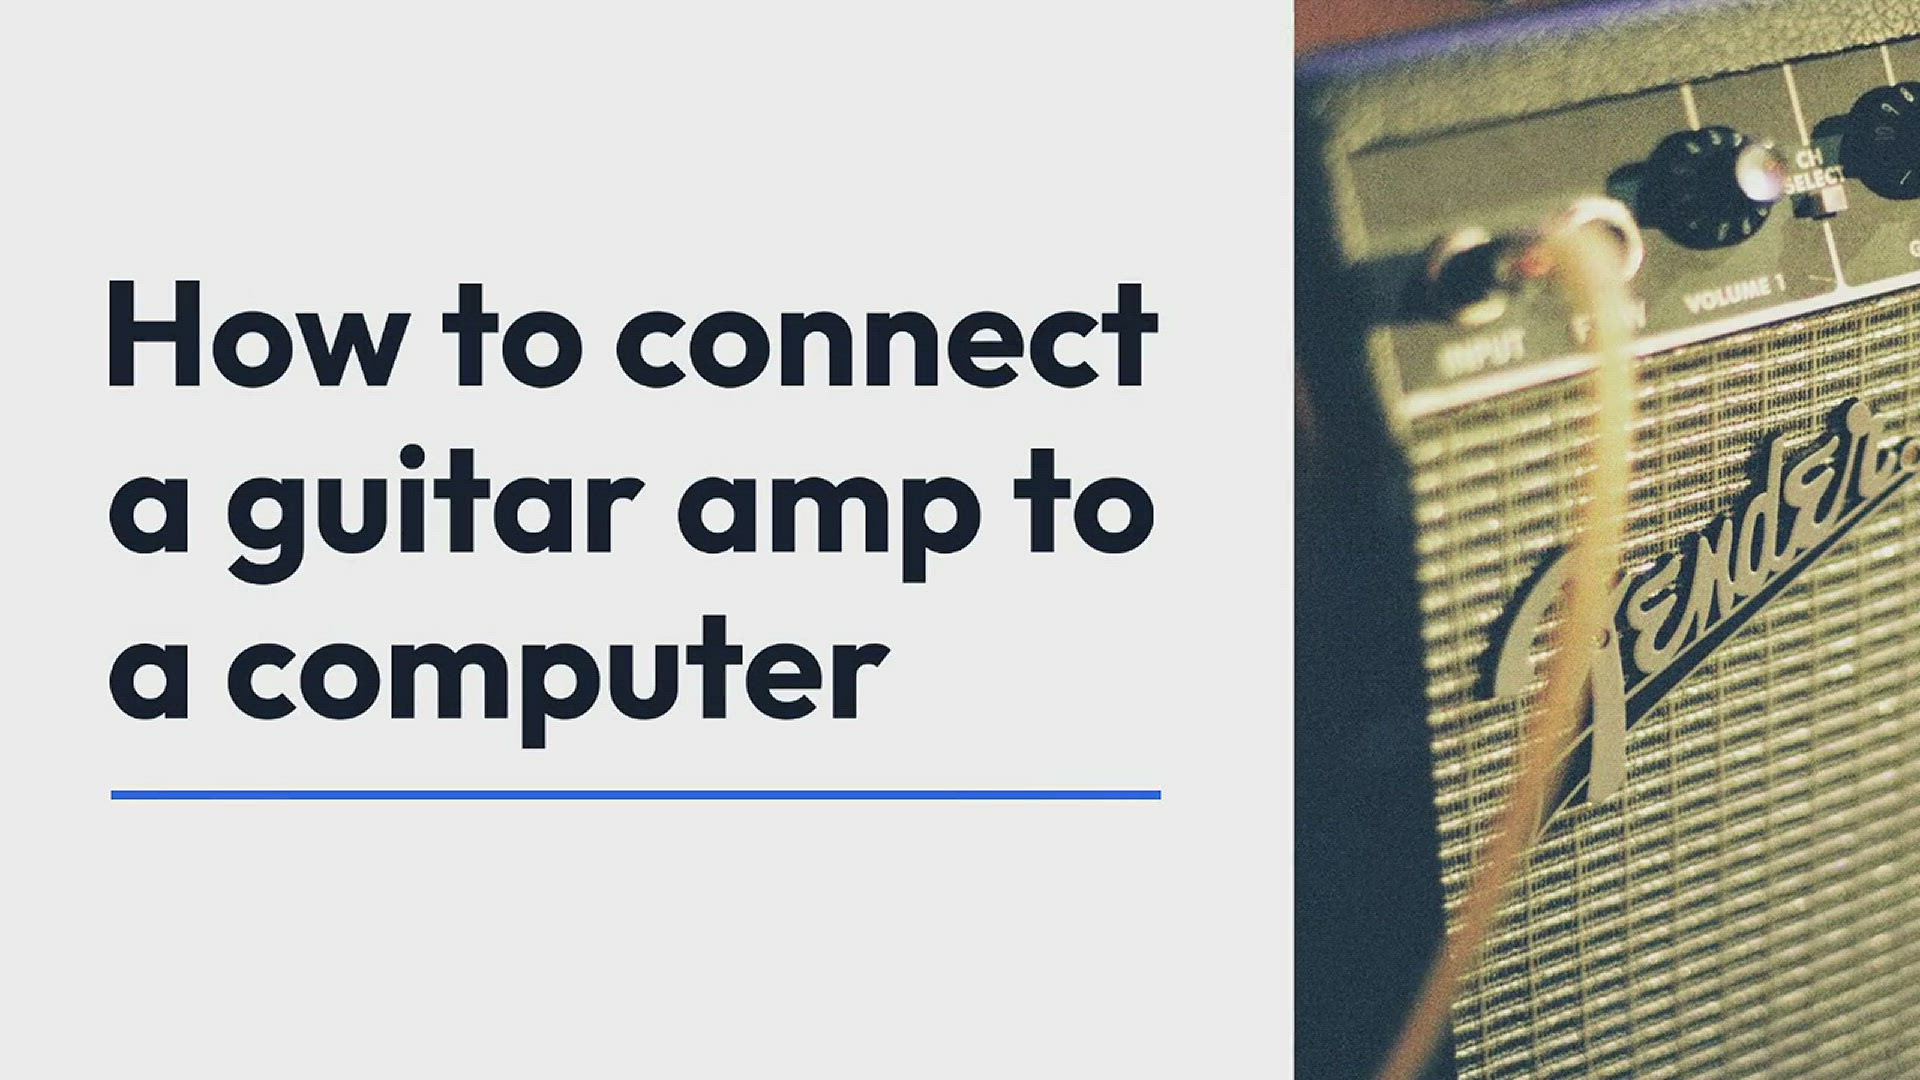 'Video thumbnail for How to connect a guitar amp to a computer'